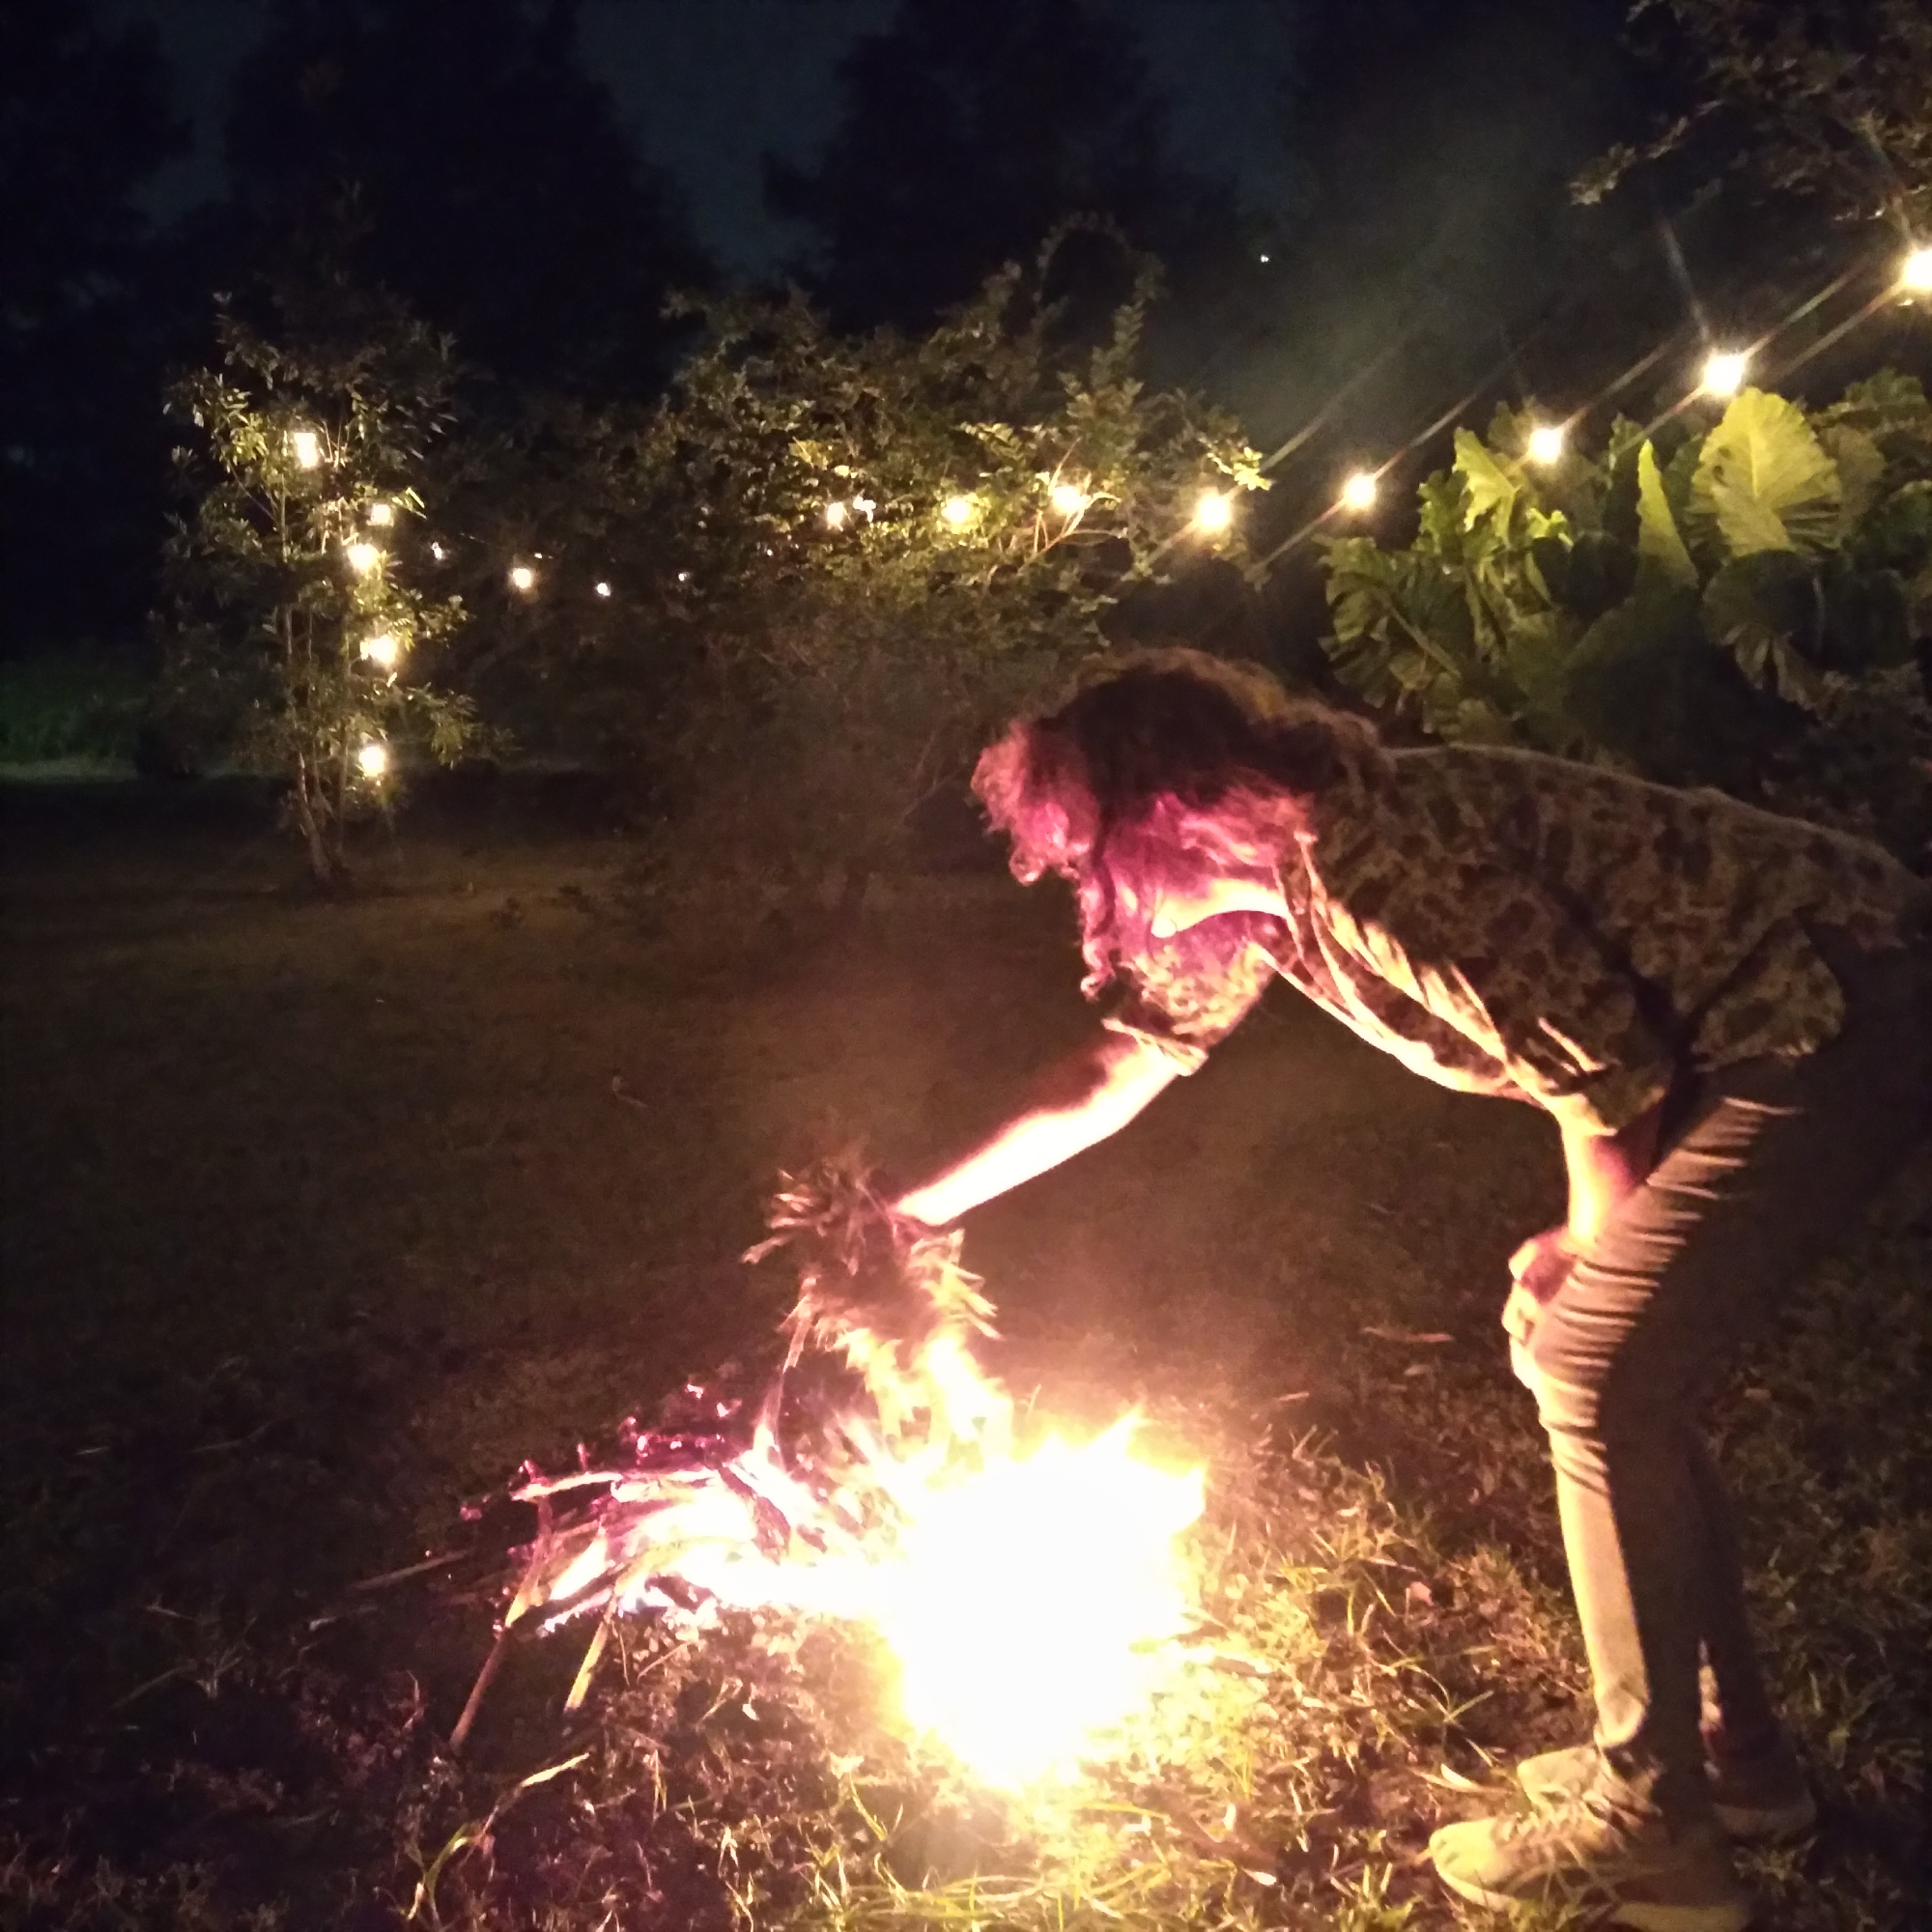  Gina putting leaves on the bonfire.